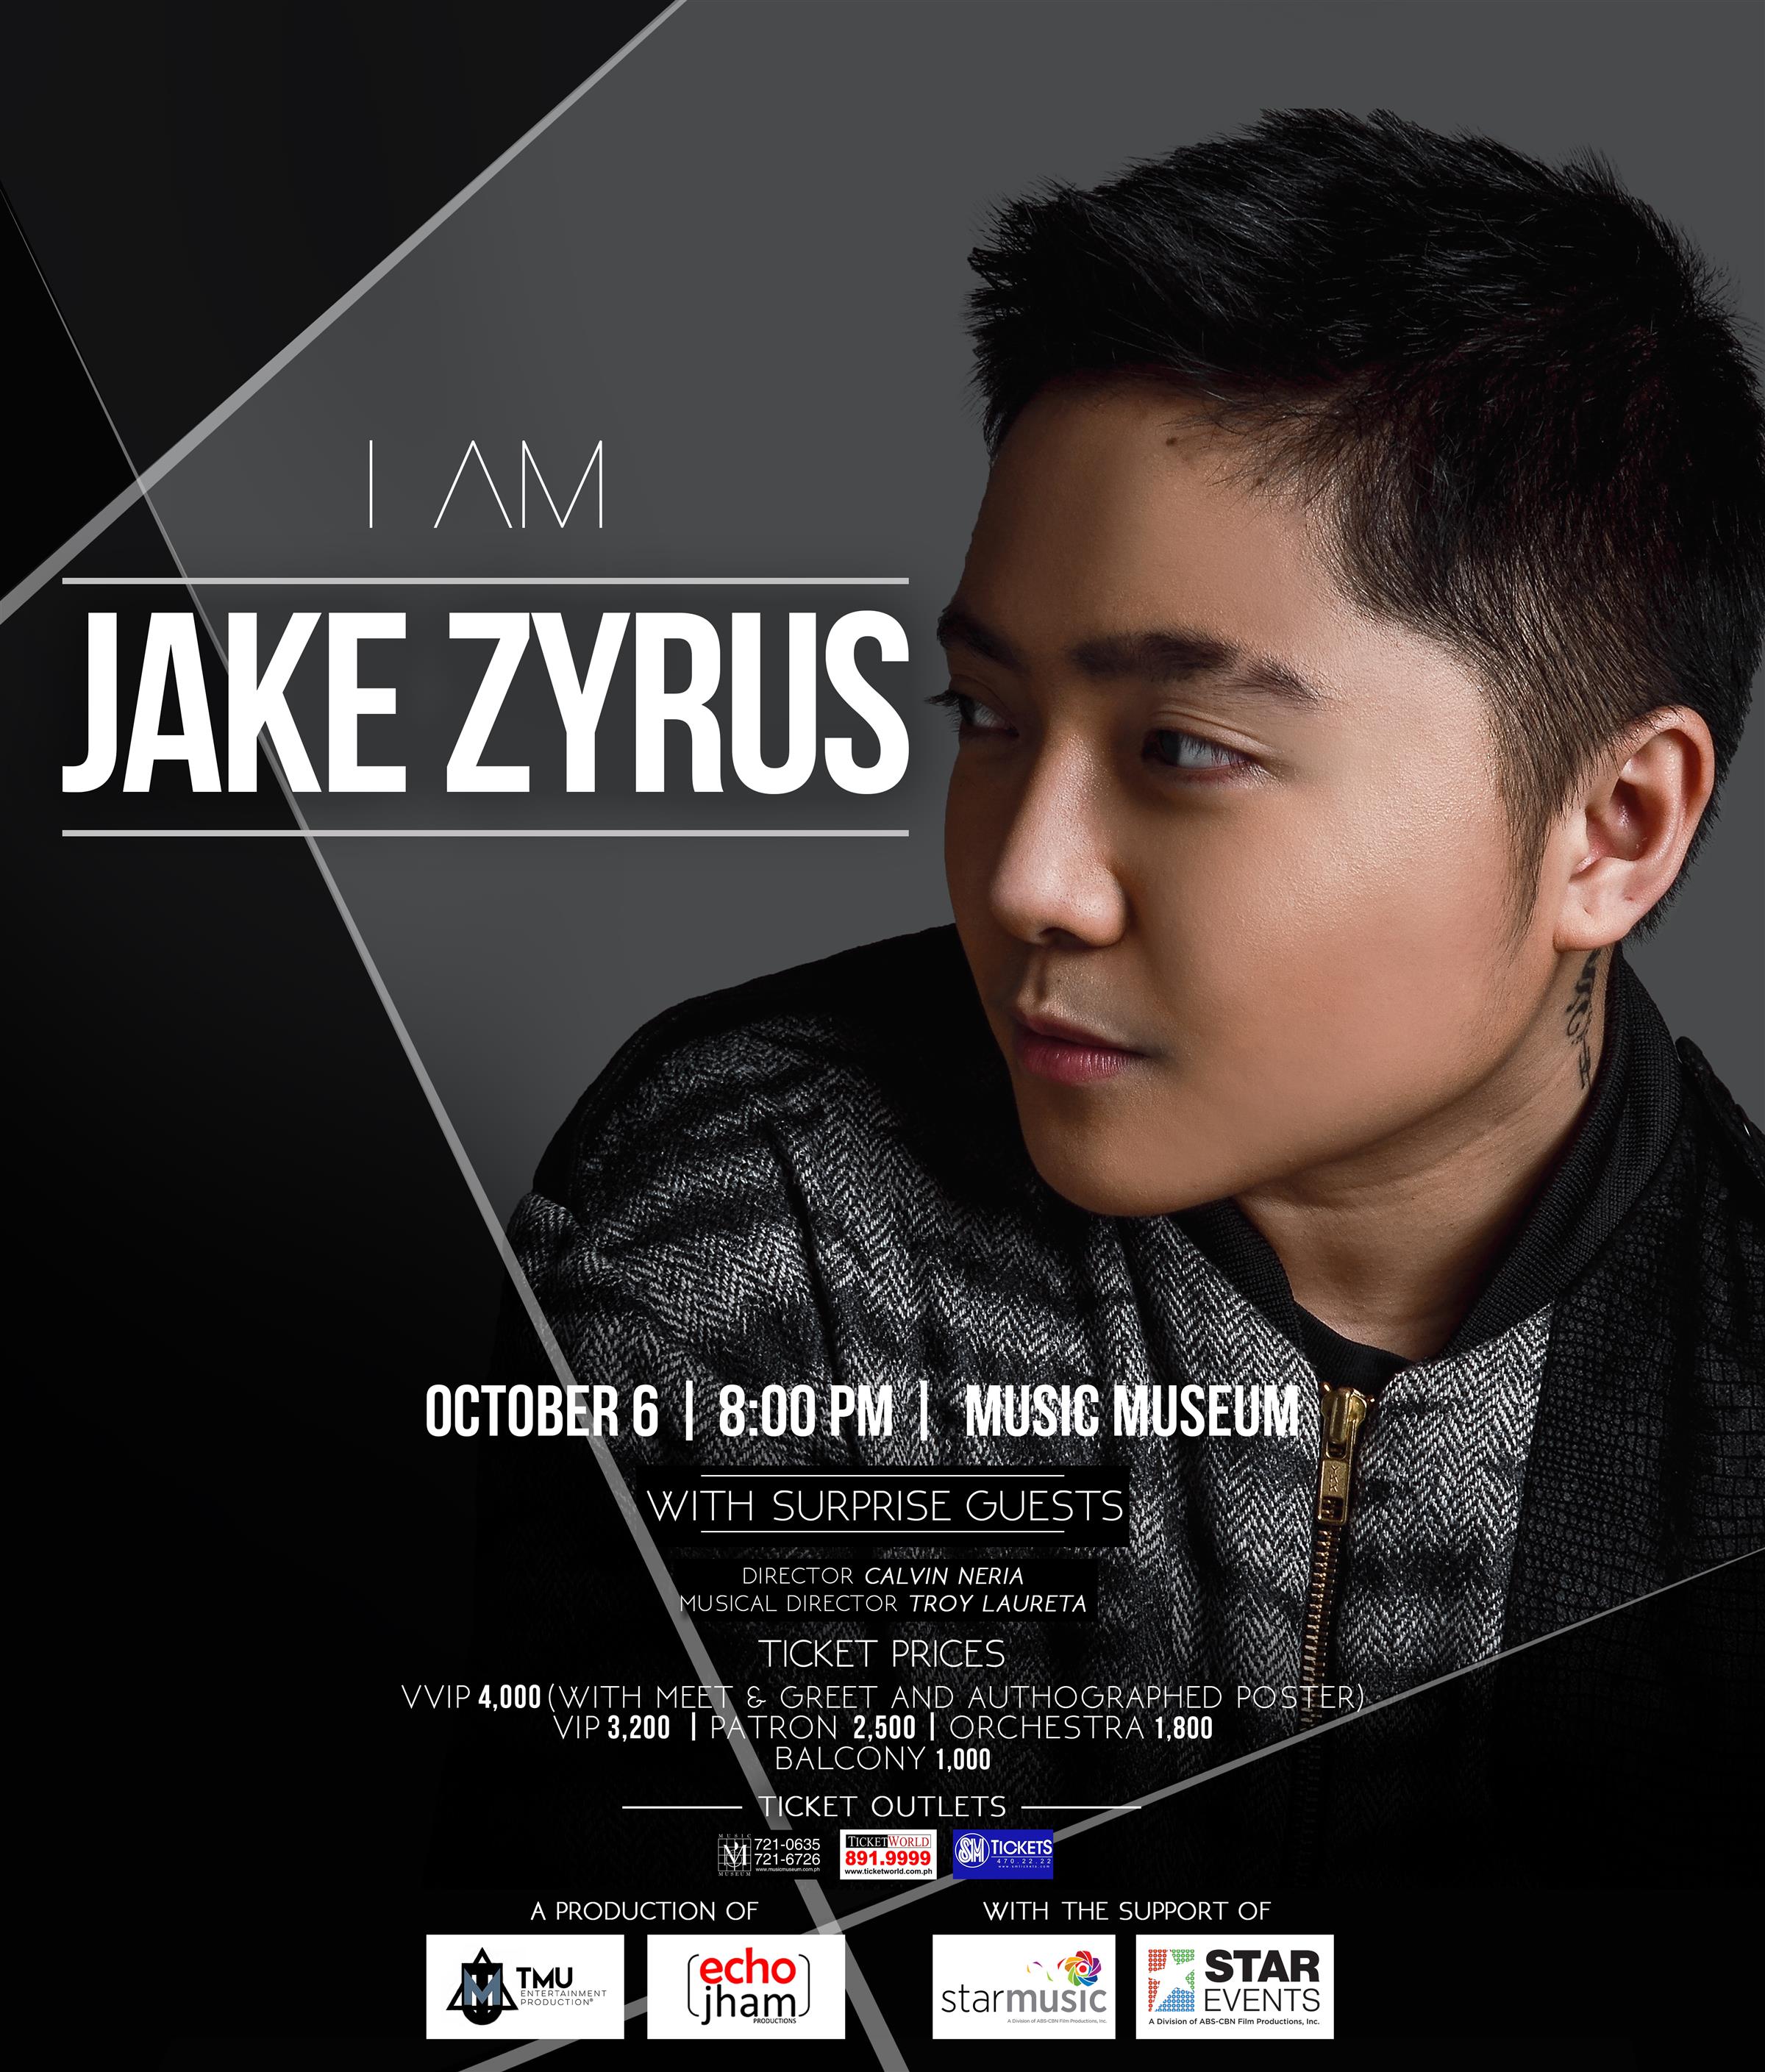 Jake Zyrus “Excited” for First Concert